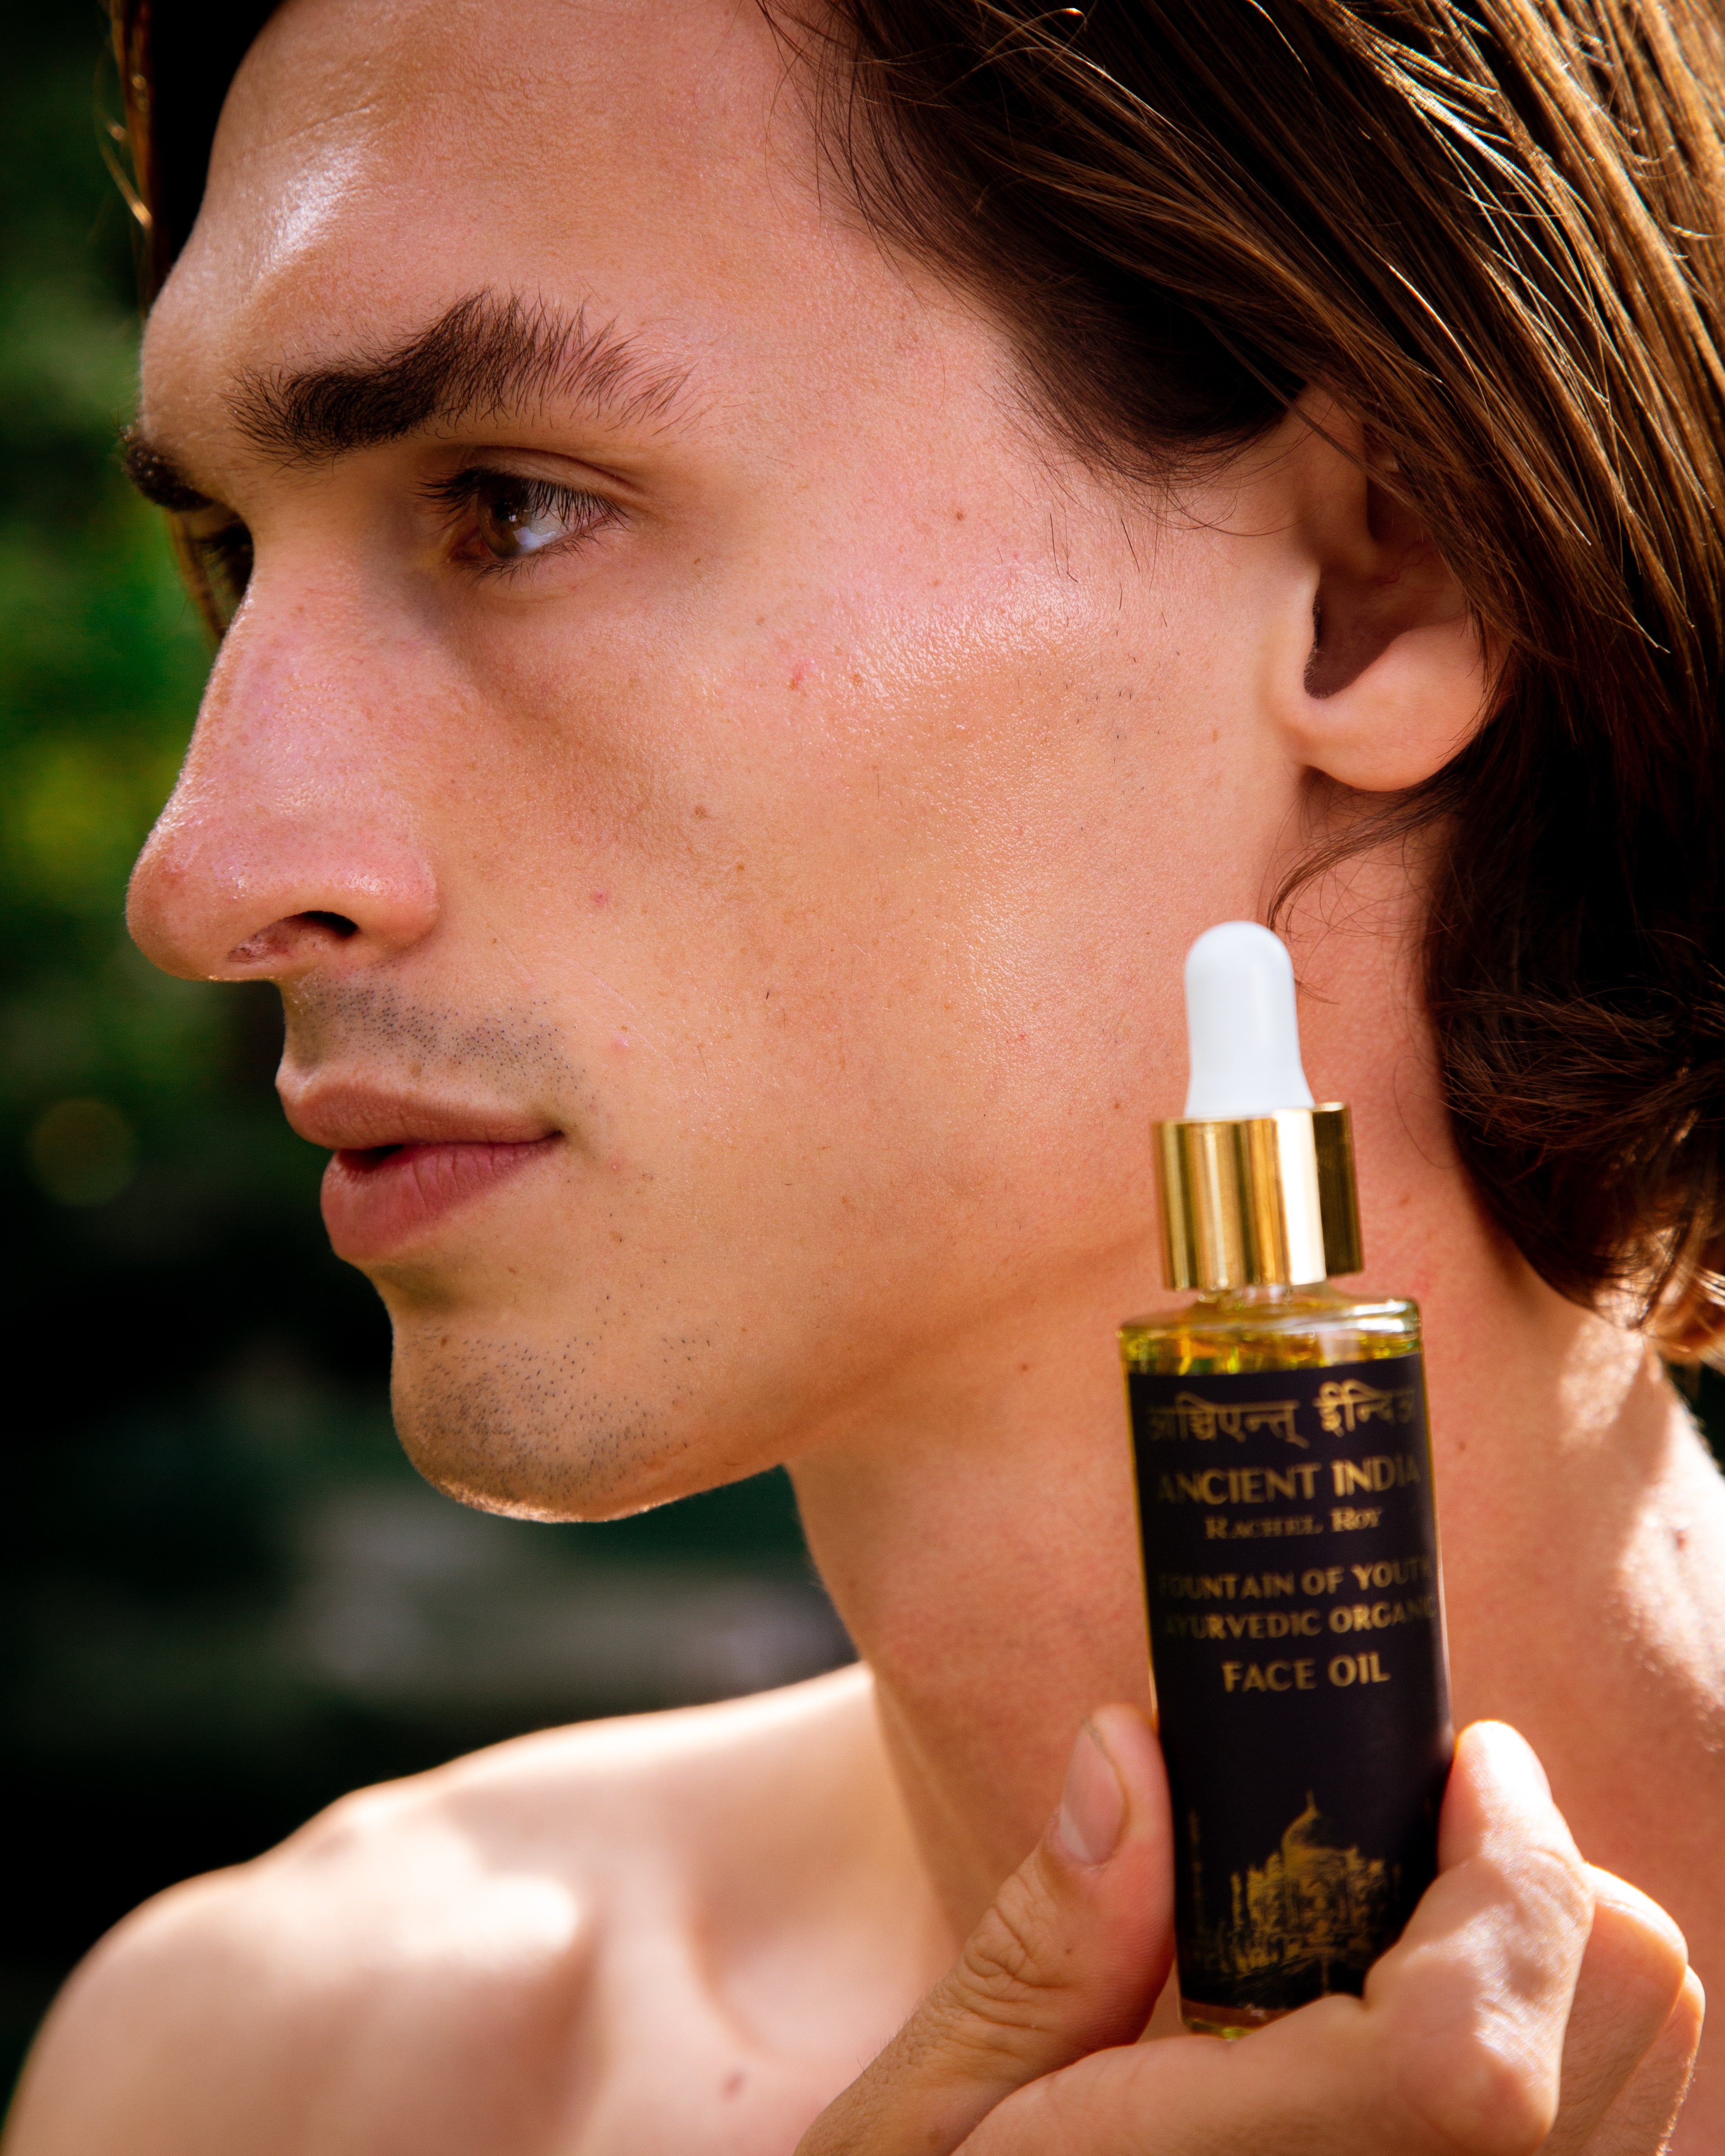 Fountain of Youth Ayurvedic Face Oil